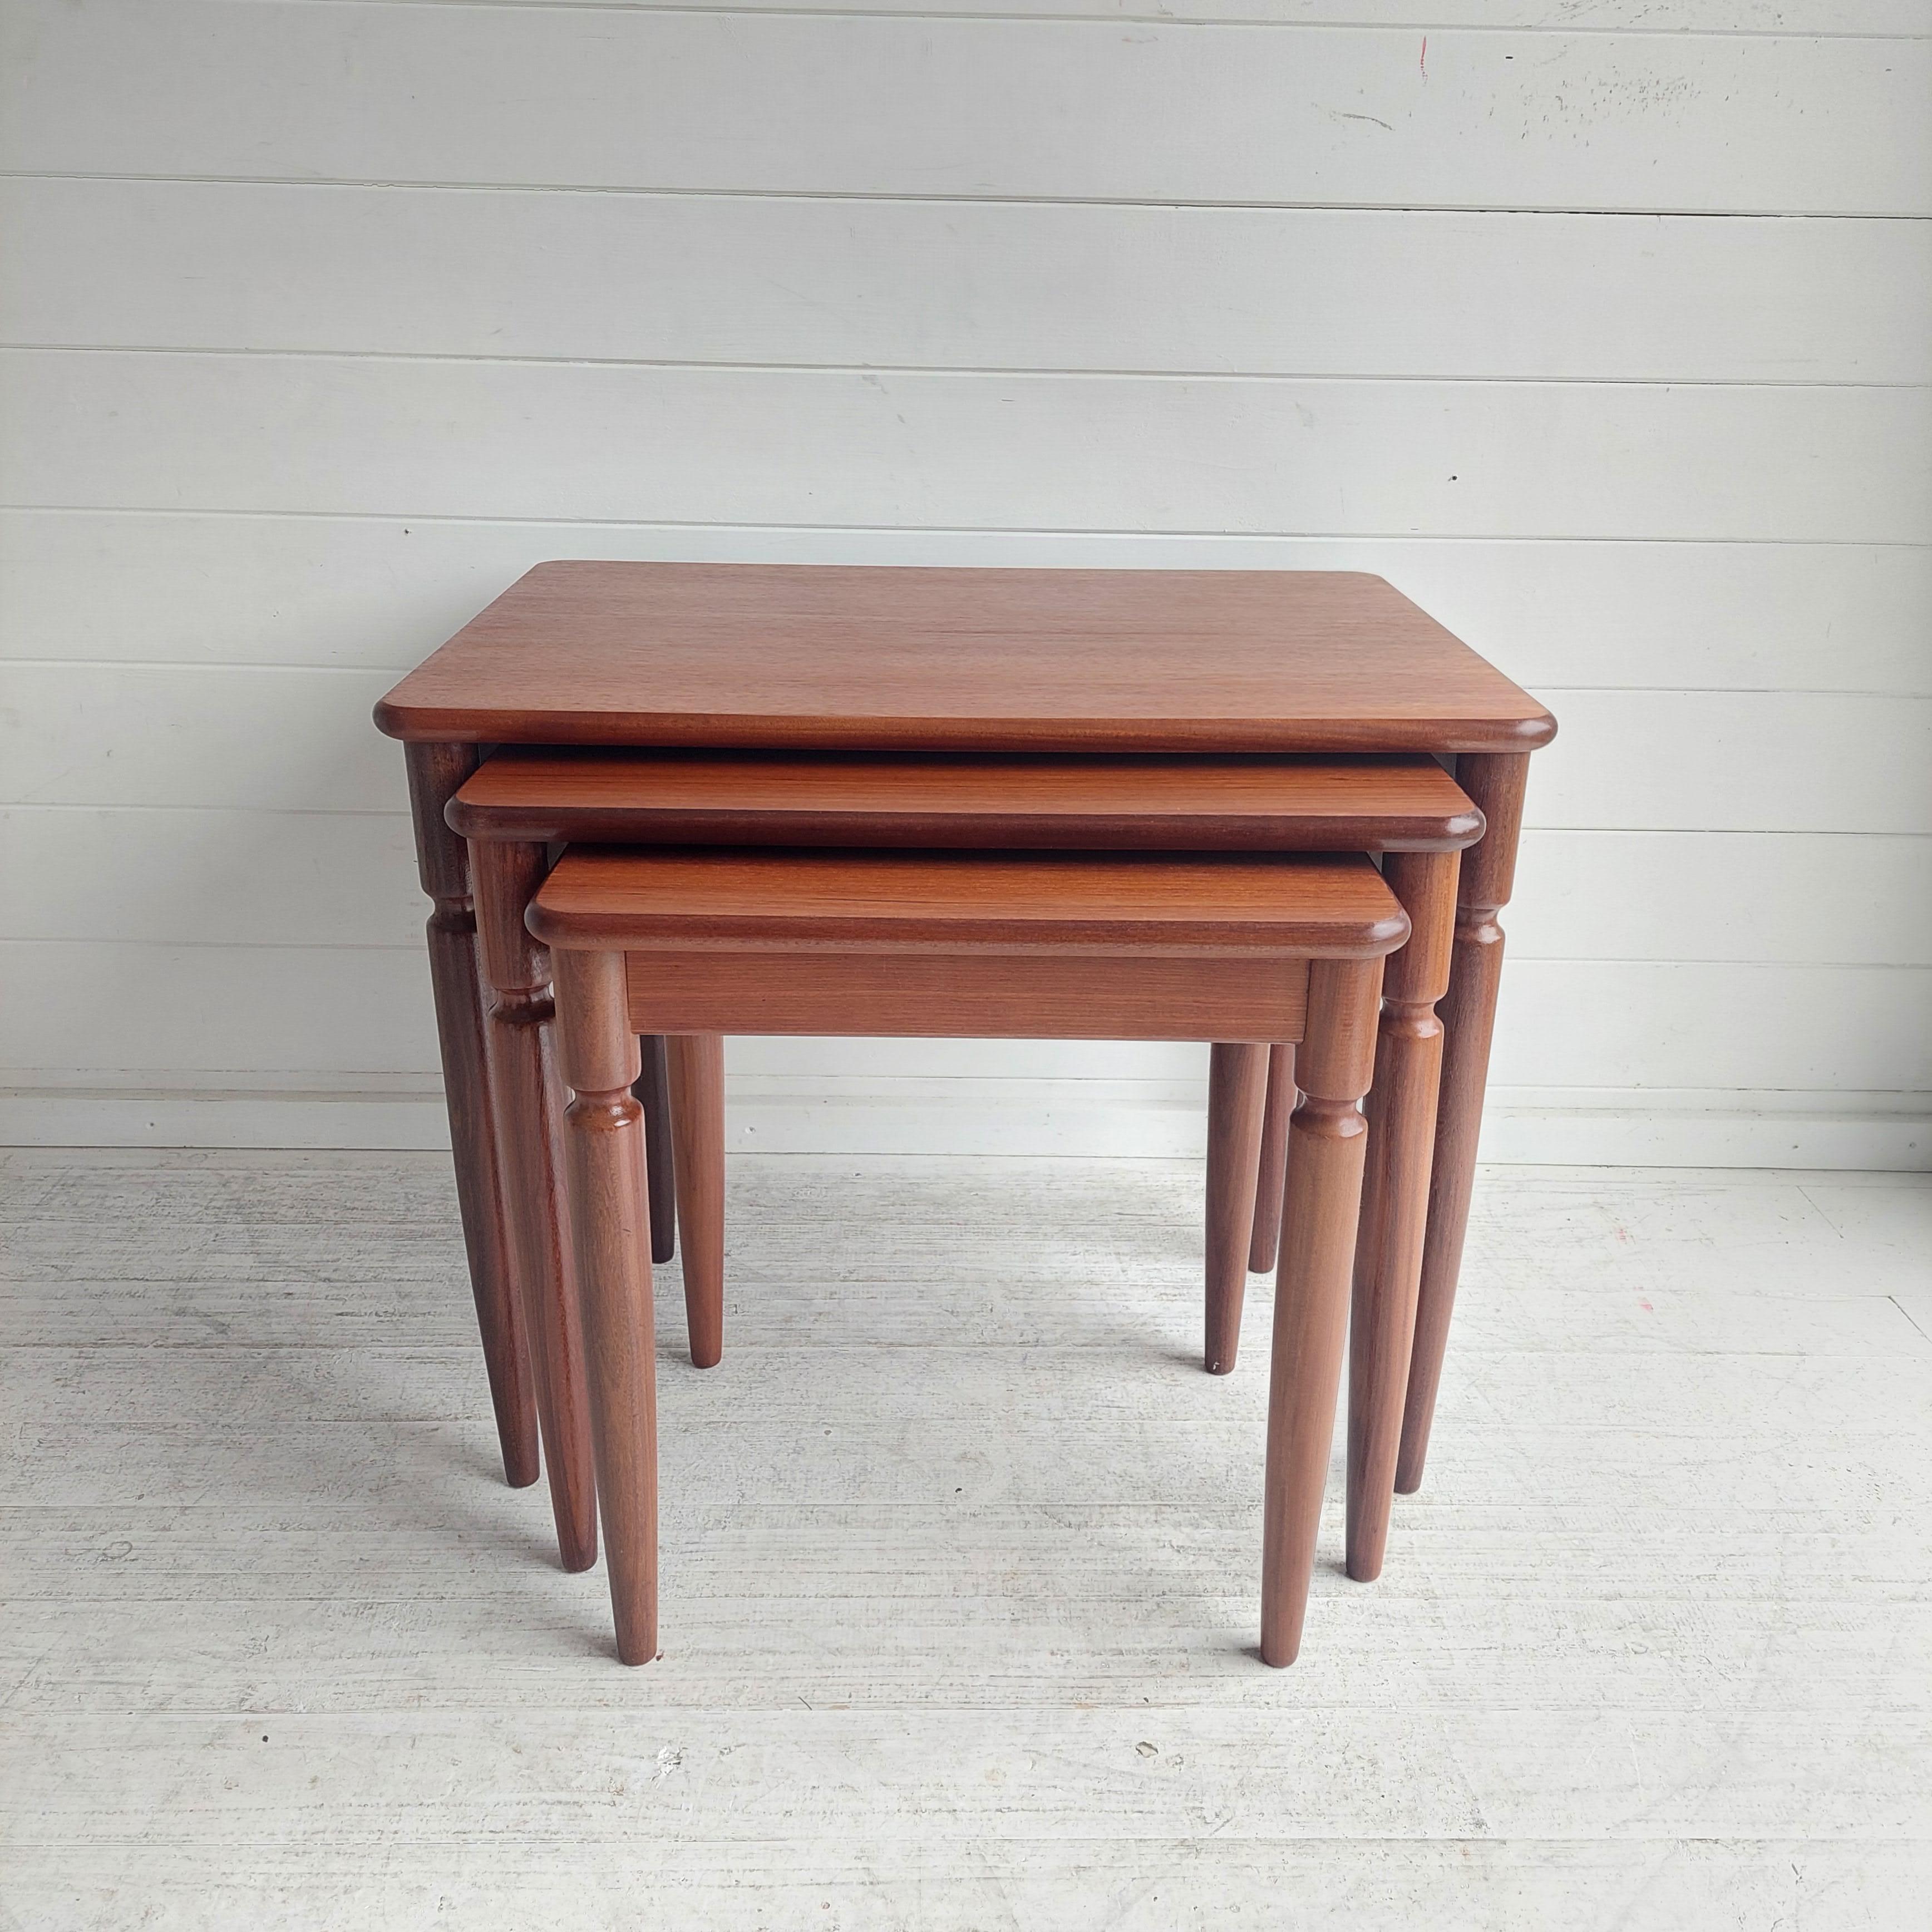 Gplan Nest of 3 tables
A scarcely seen model which brings elegance and style
Having rectangular tops with round edged and raised on tapering legs with lovely turned details at their tops.

Attractive and versatile set of furniture that would fit